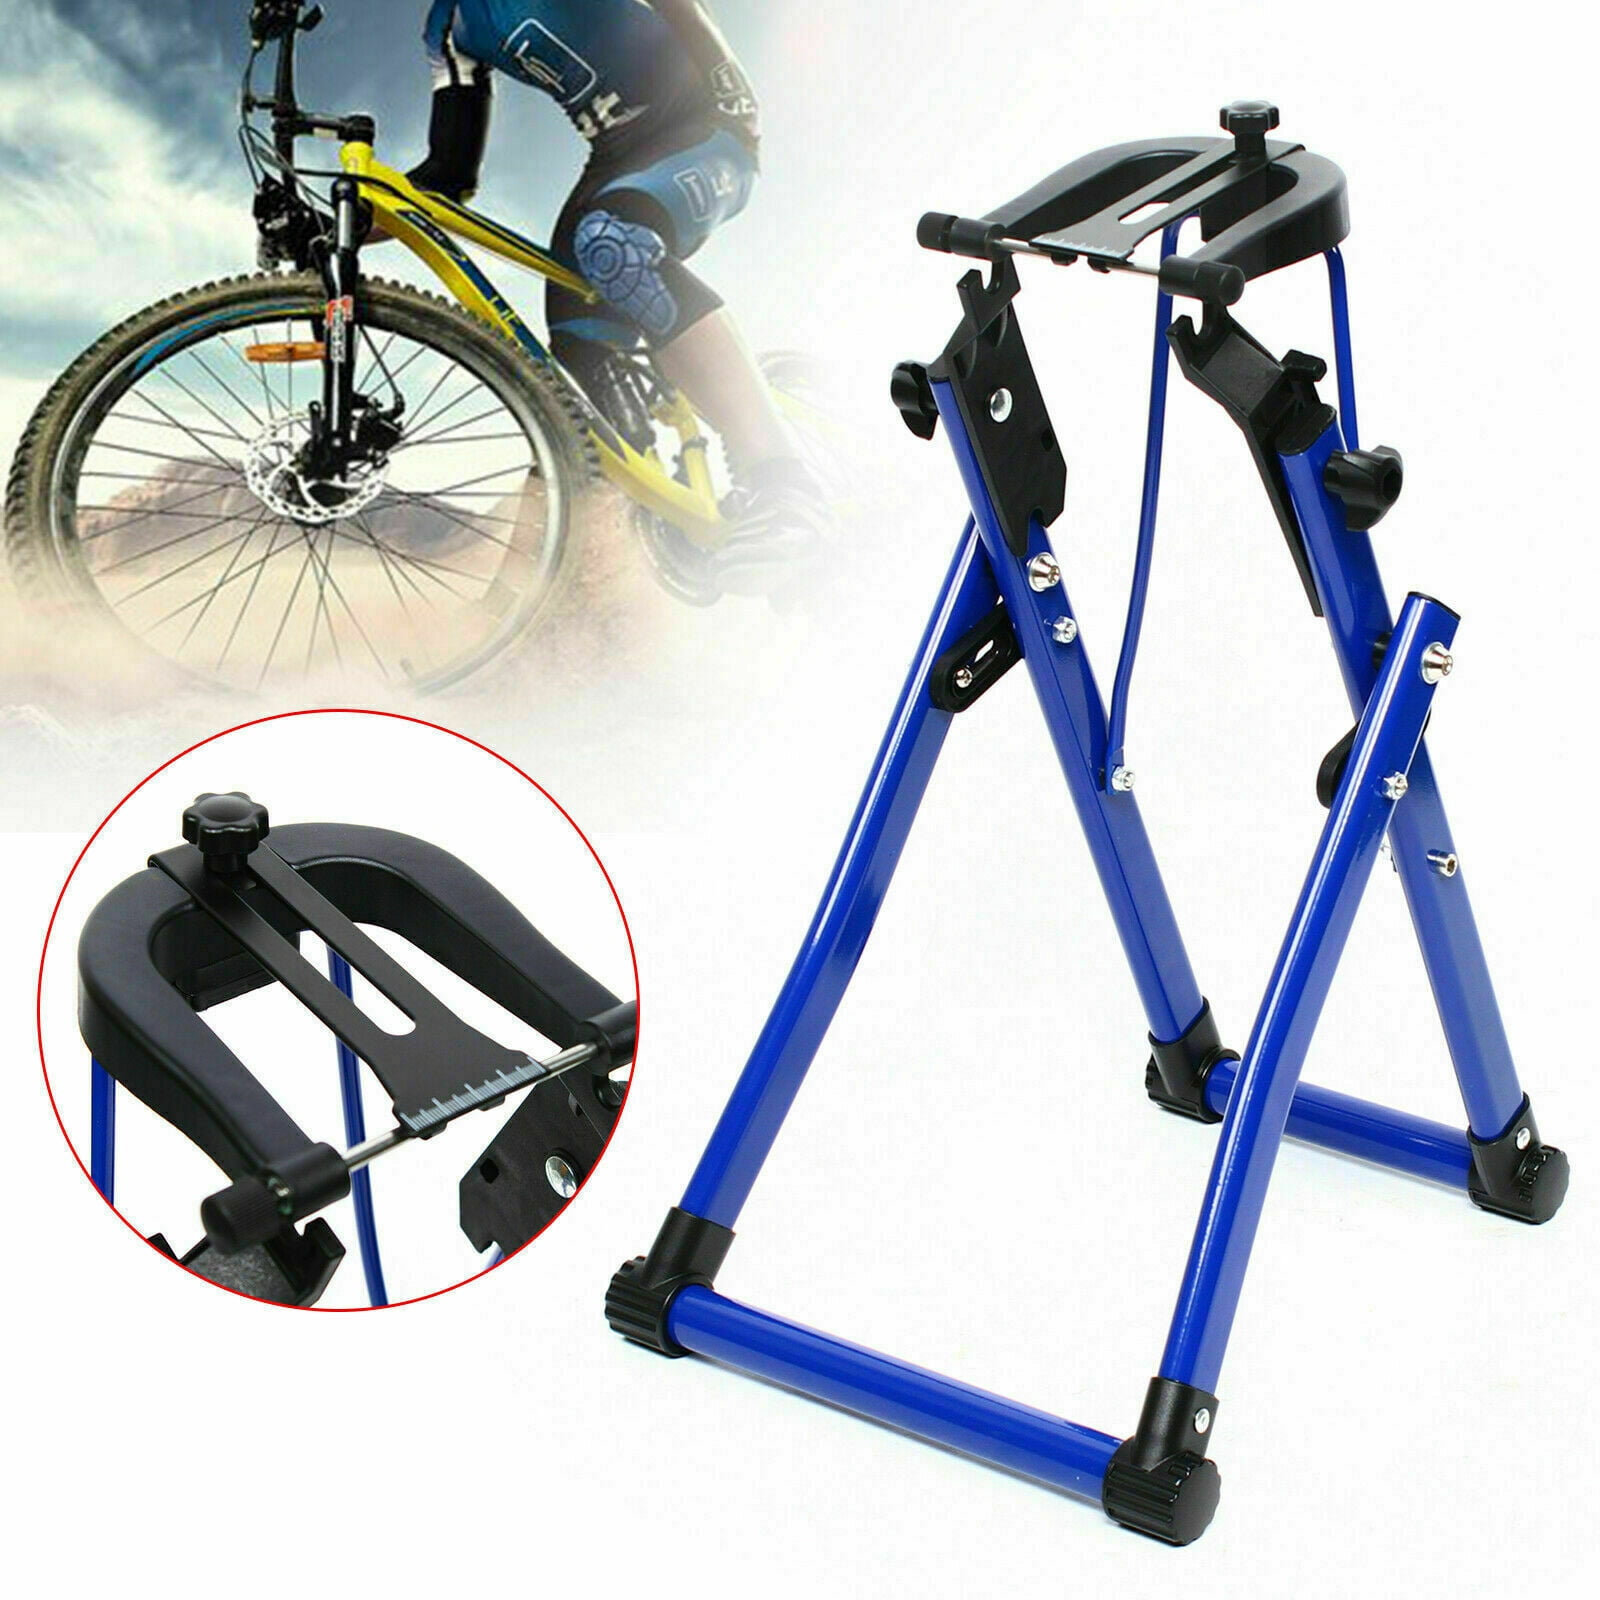 Bicycle Bike Wheel Truing Stand Mechanic Truing Stand for 24-28 inch Wheel Tools 